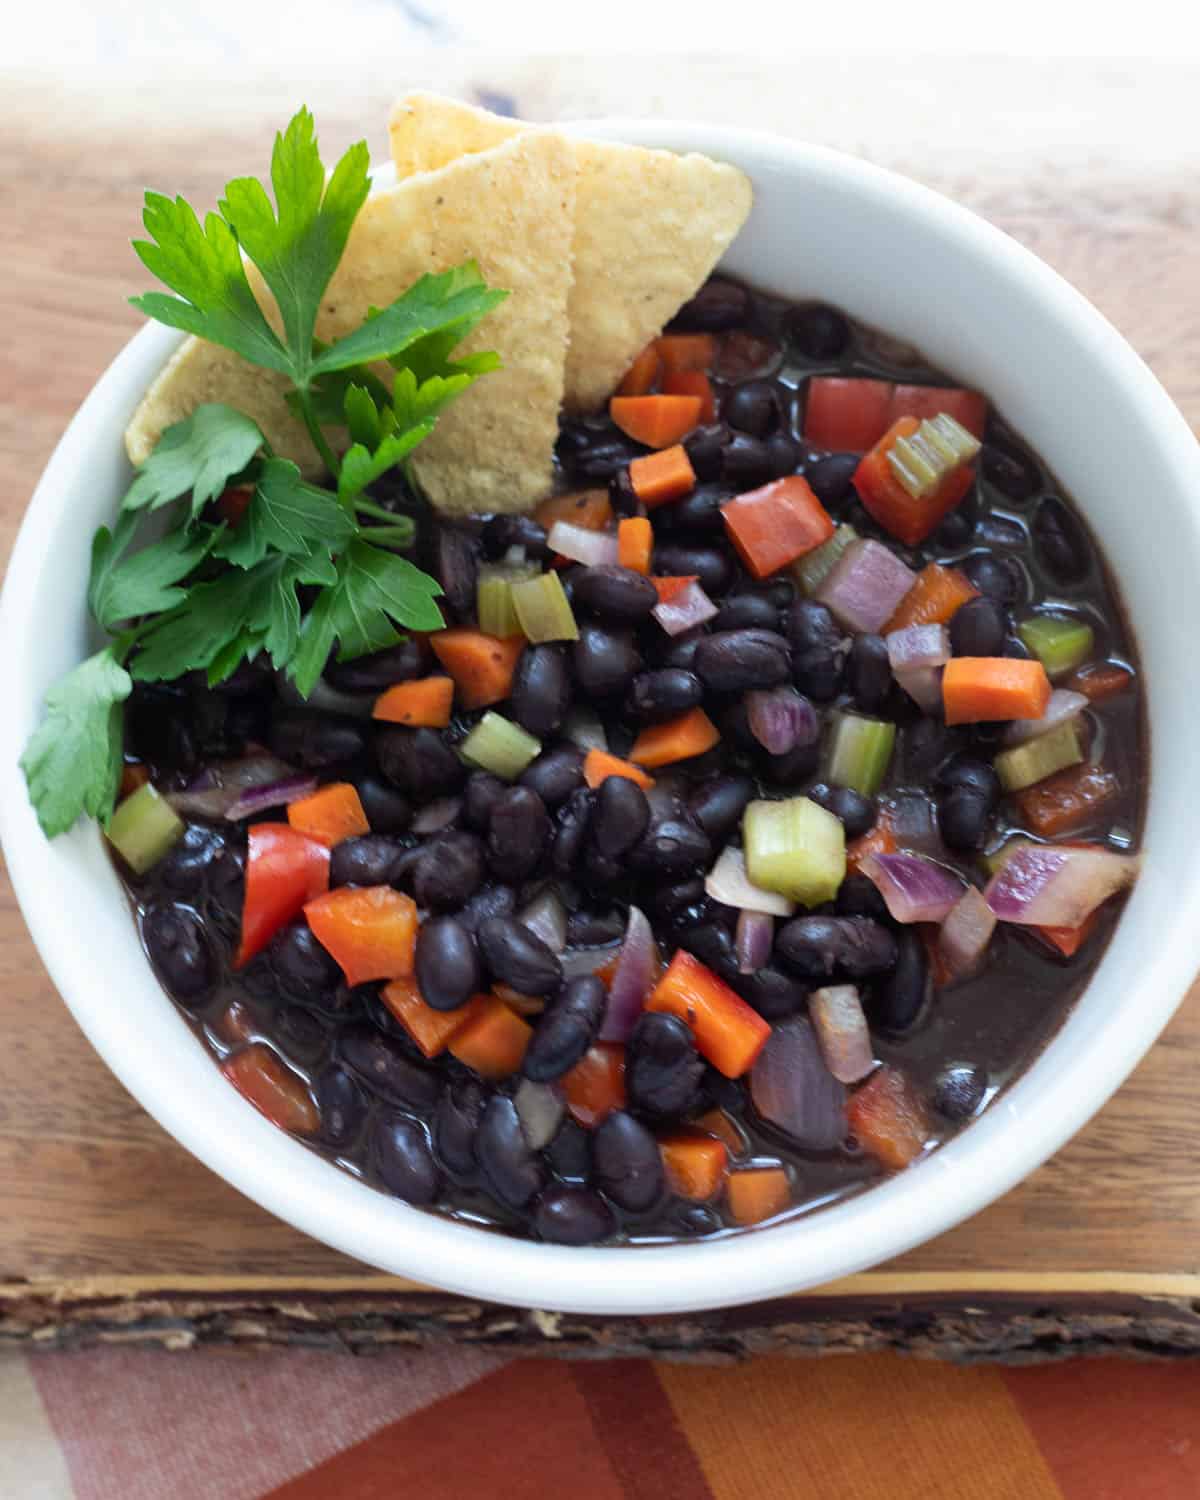 Overhead of Copycat Panera black bean soup served with tortilla chips and fresh herbs.
